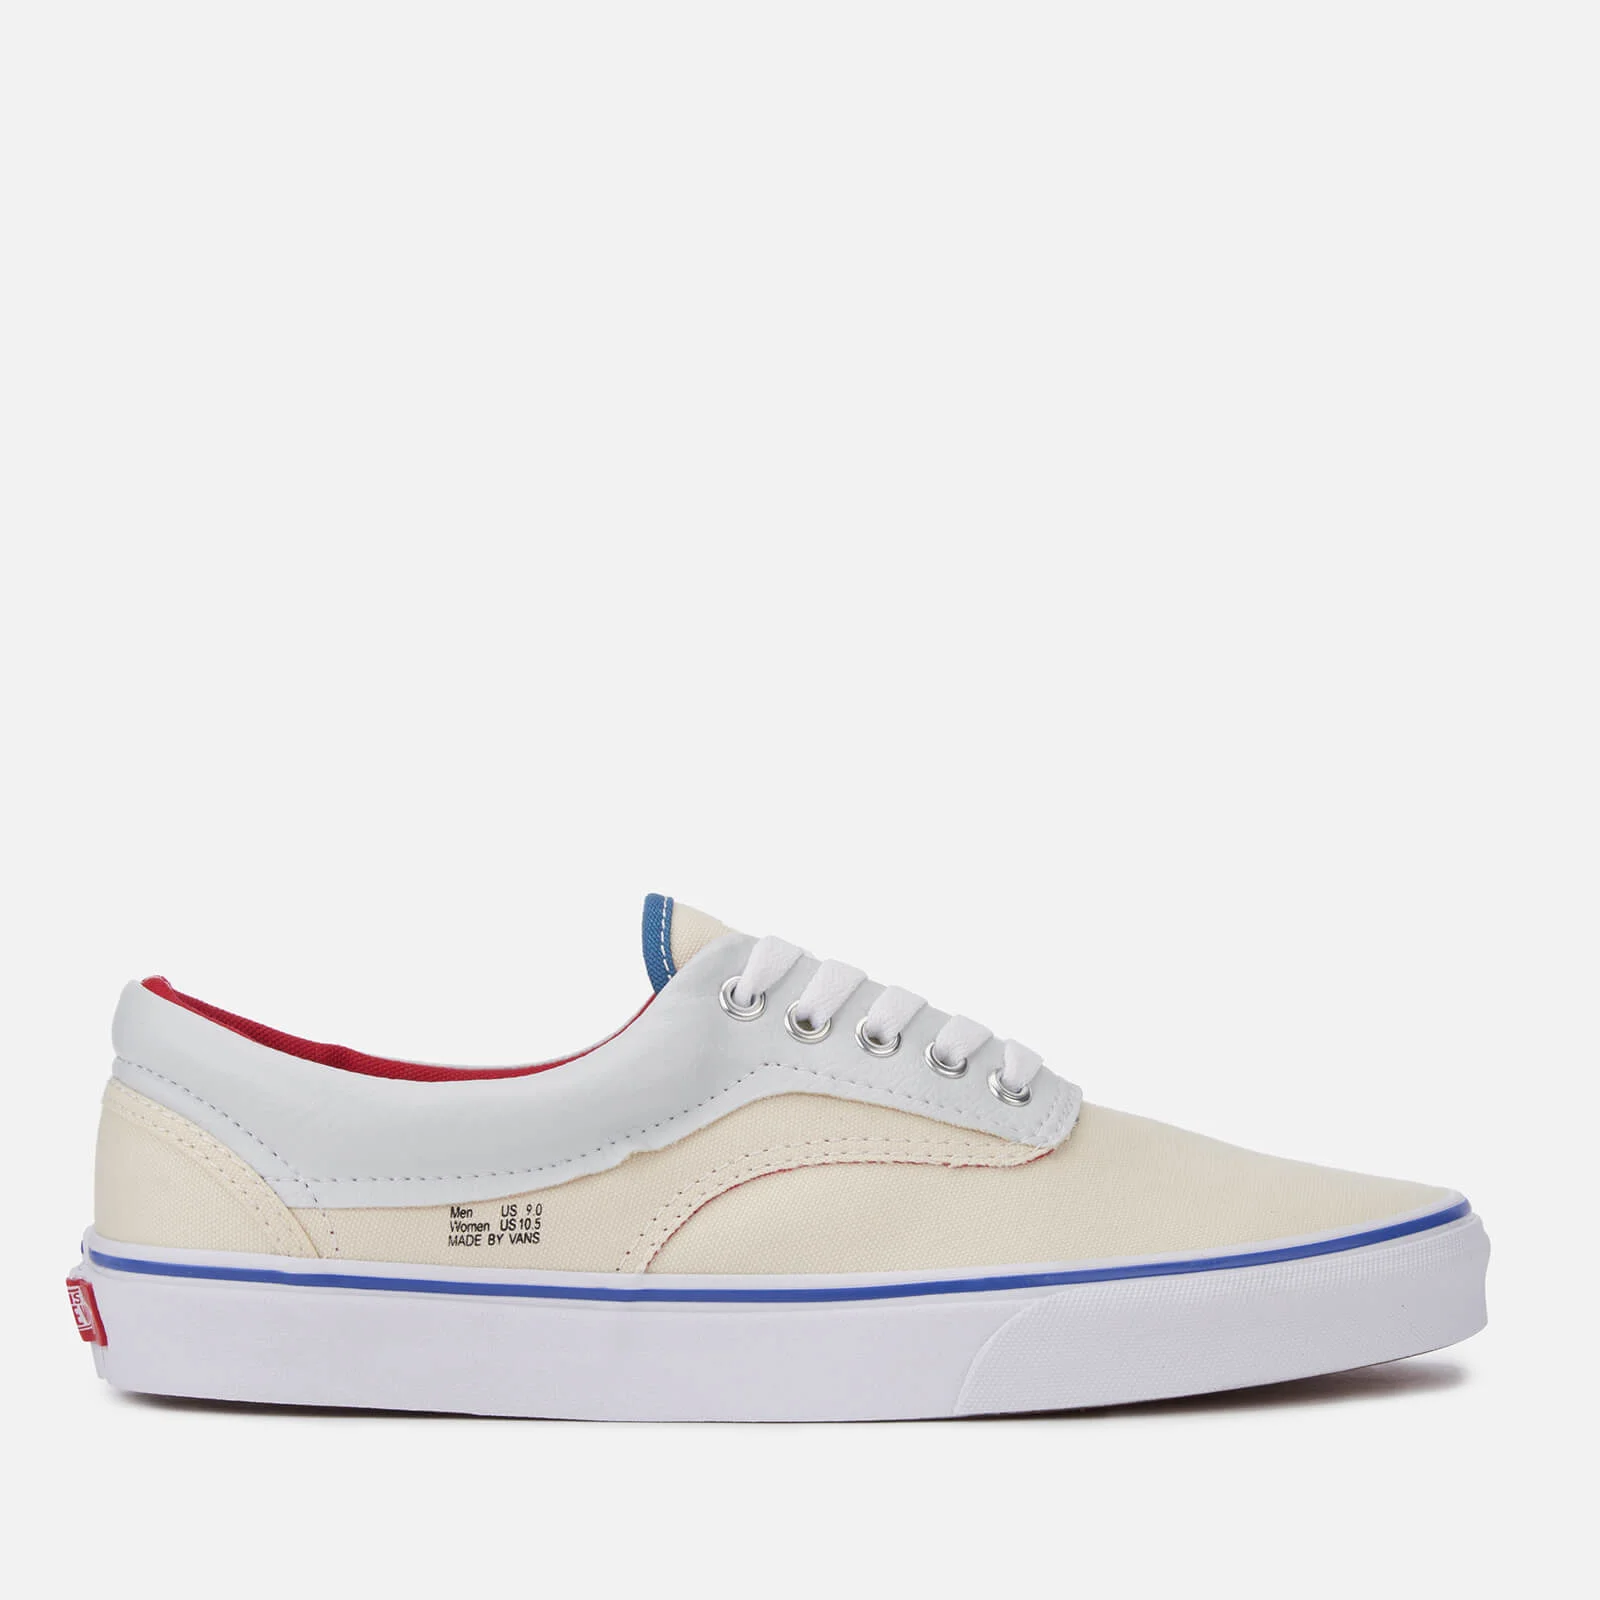 Vans Men's Outside in Era Trainers - Natural/Stv Navy/Red Image 1